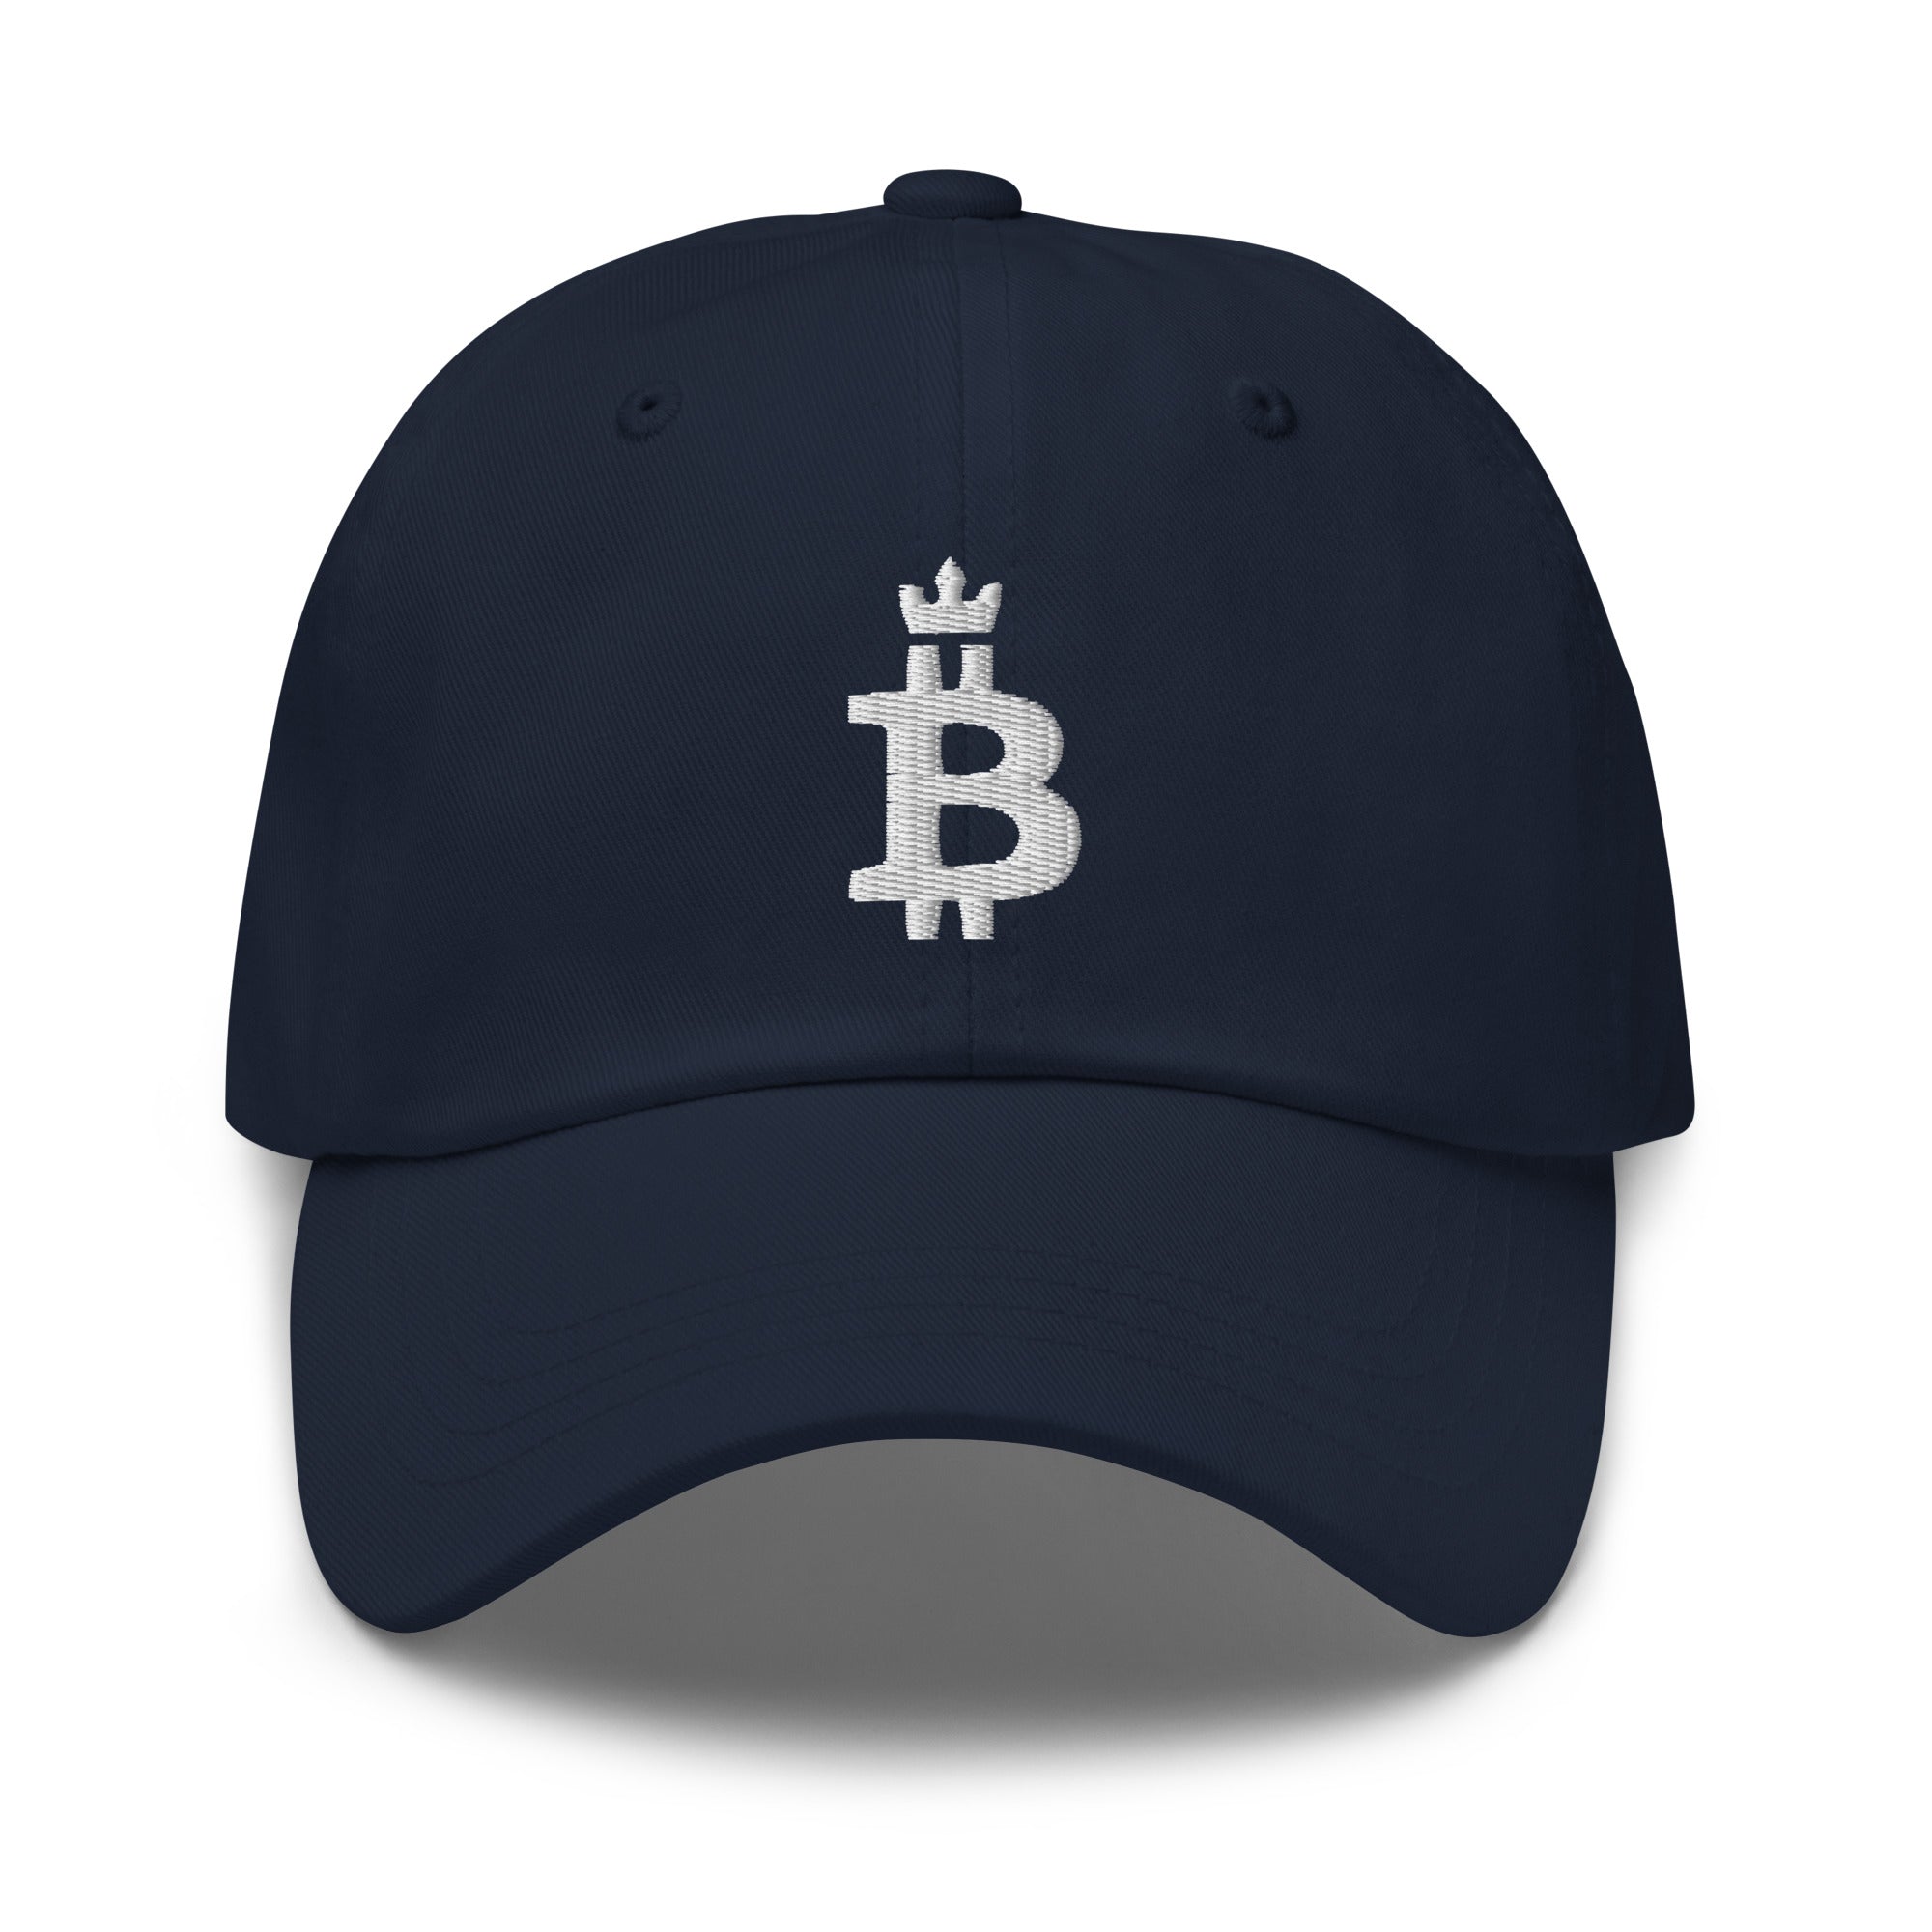 Bitcoin Hat - This Bitcoin Dominance Hat features an embroidered Bitcoin design on the front of a navy cap. Front view.